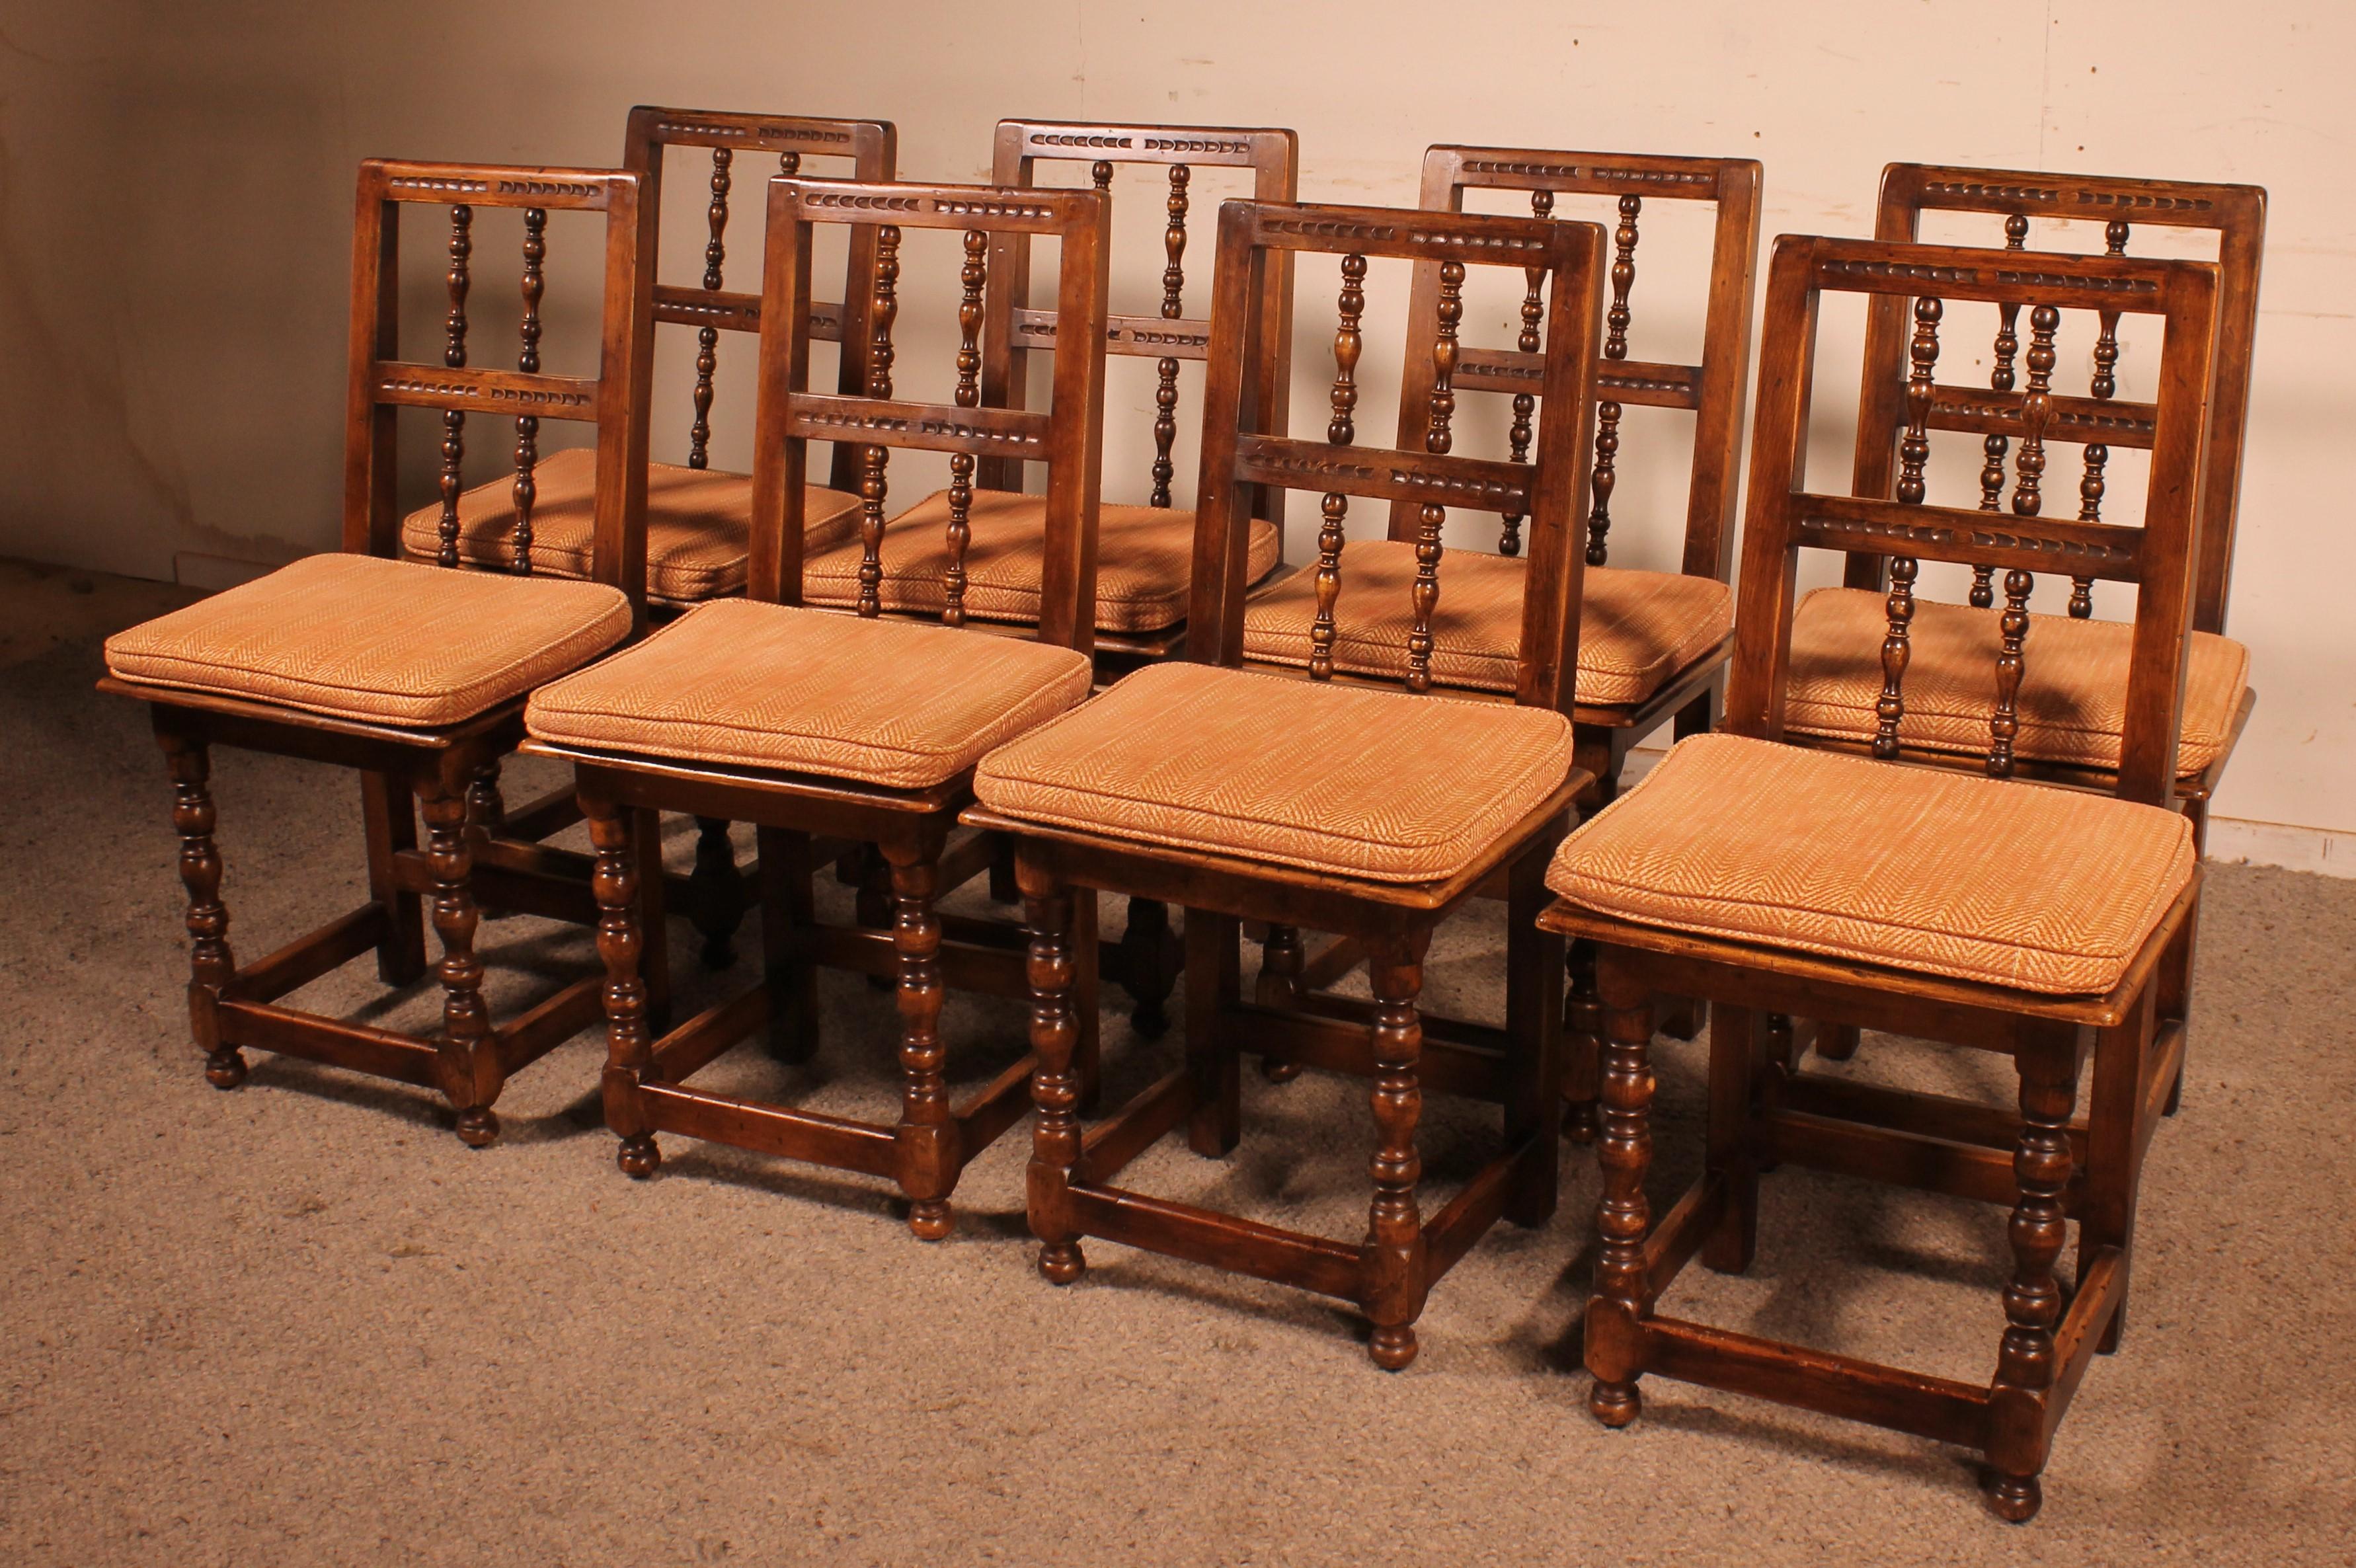 lovely set of 8 Spanish chairs

Very nice set that stands out for its good quality and small size. Indeed it is a small model of chairs

Very nice patina and in very good condition and solid

The chairs are comfortable and have a good seat height.